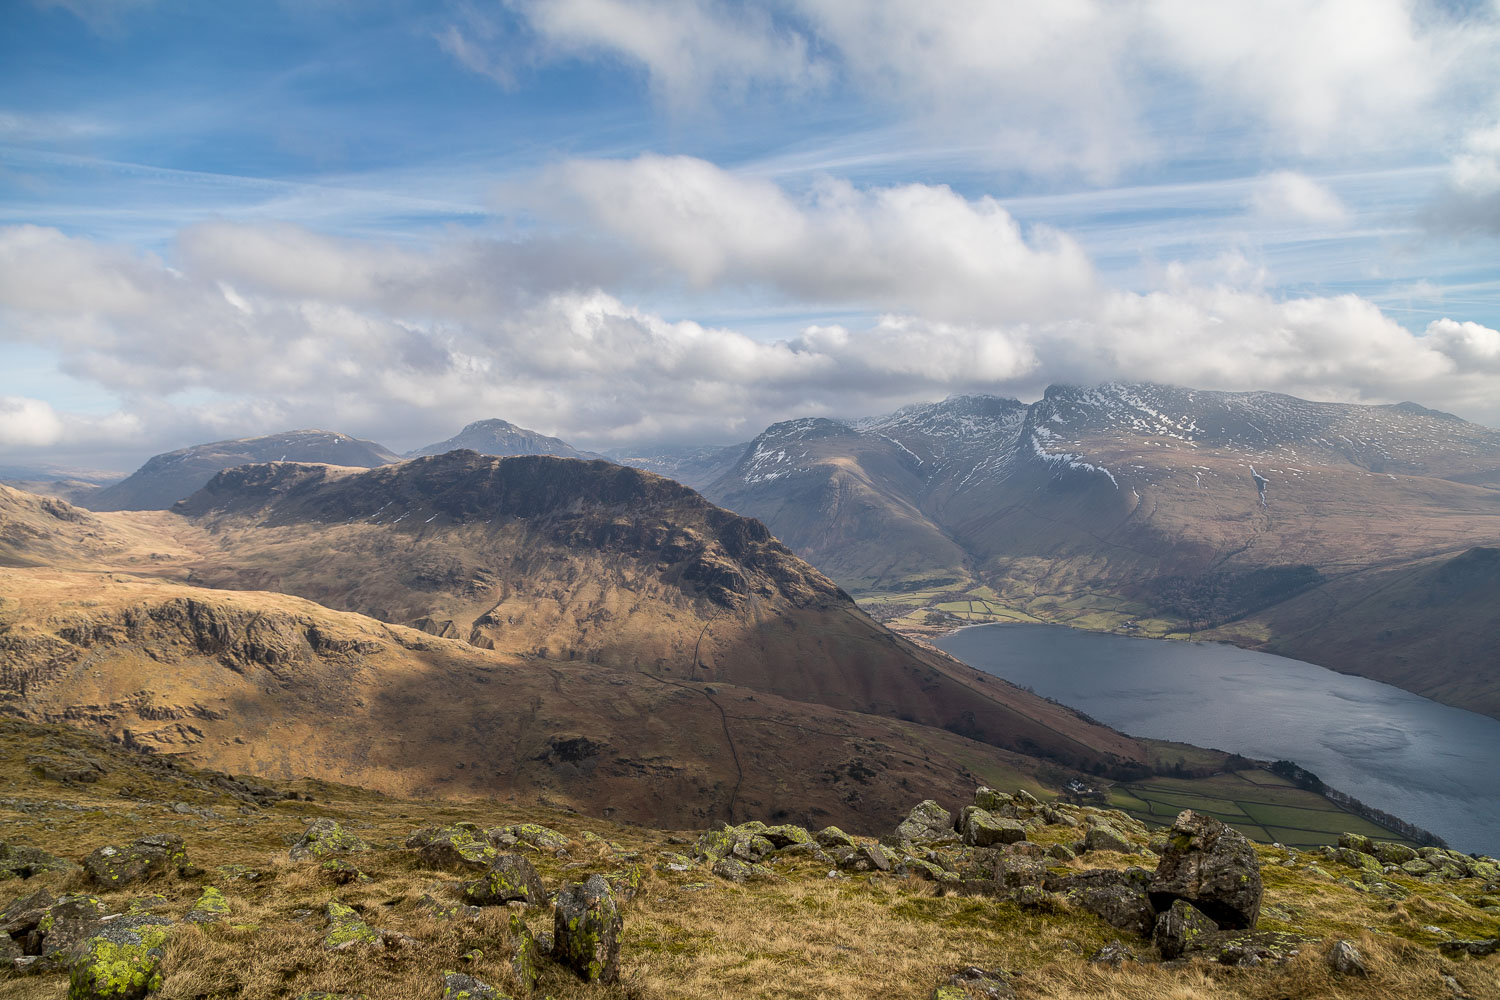 Yewbarrow, Wastwater and the Scafells